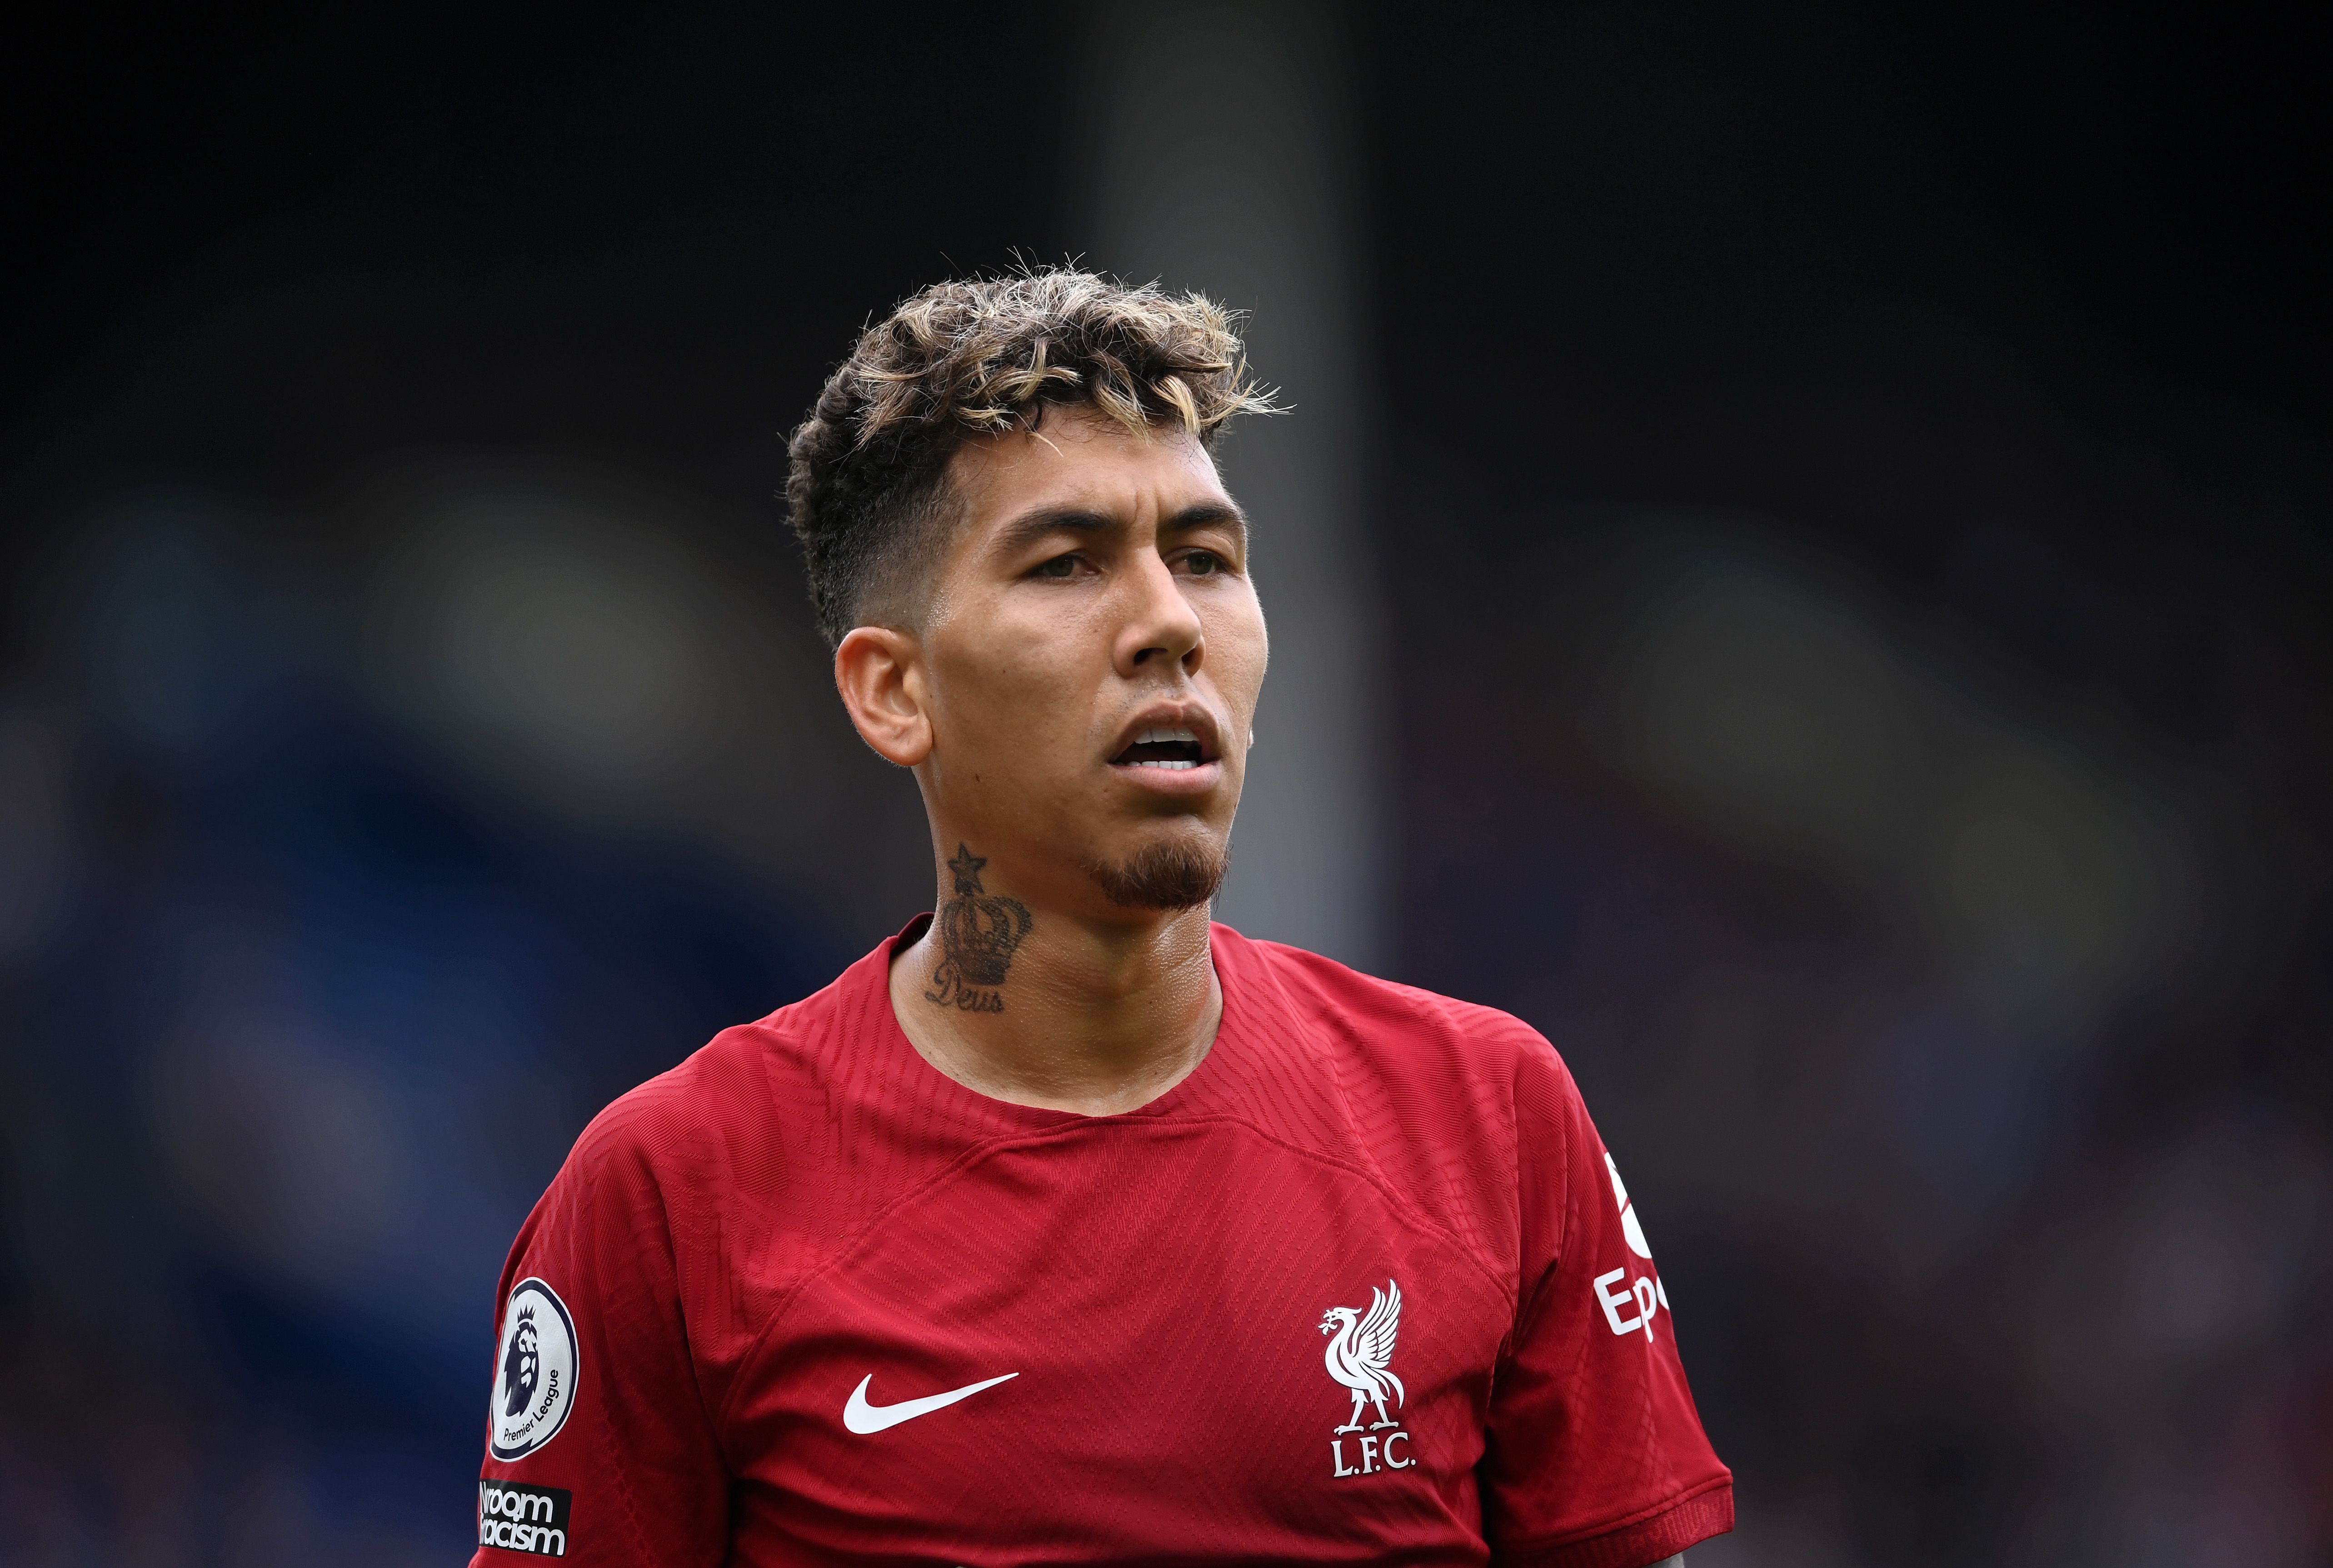 Roberto Firmino of Liverpool looks on during the Premier League 